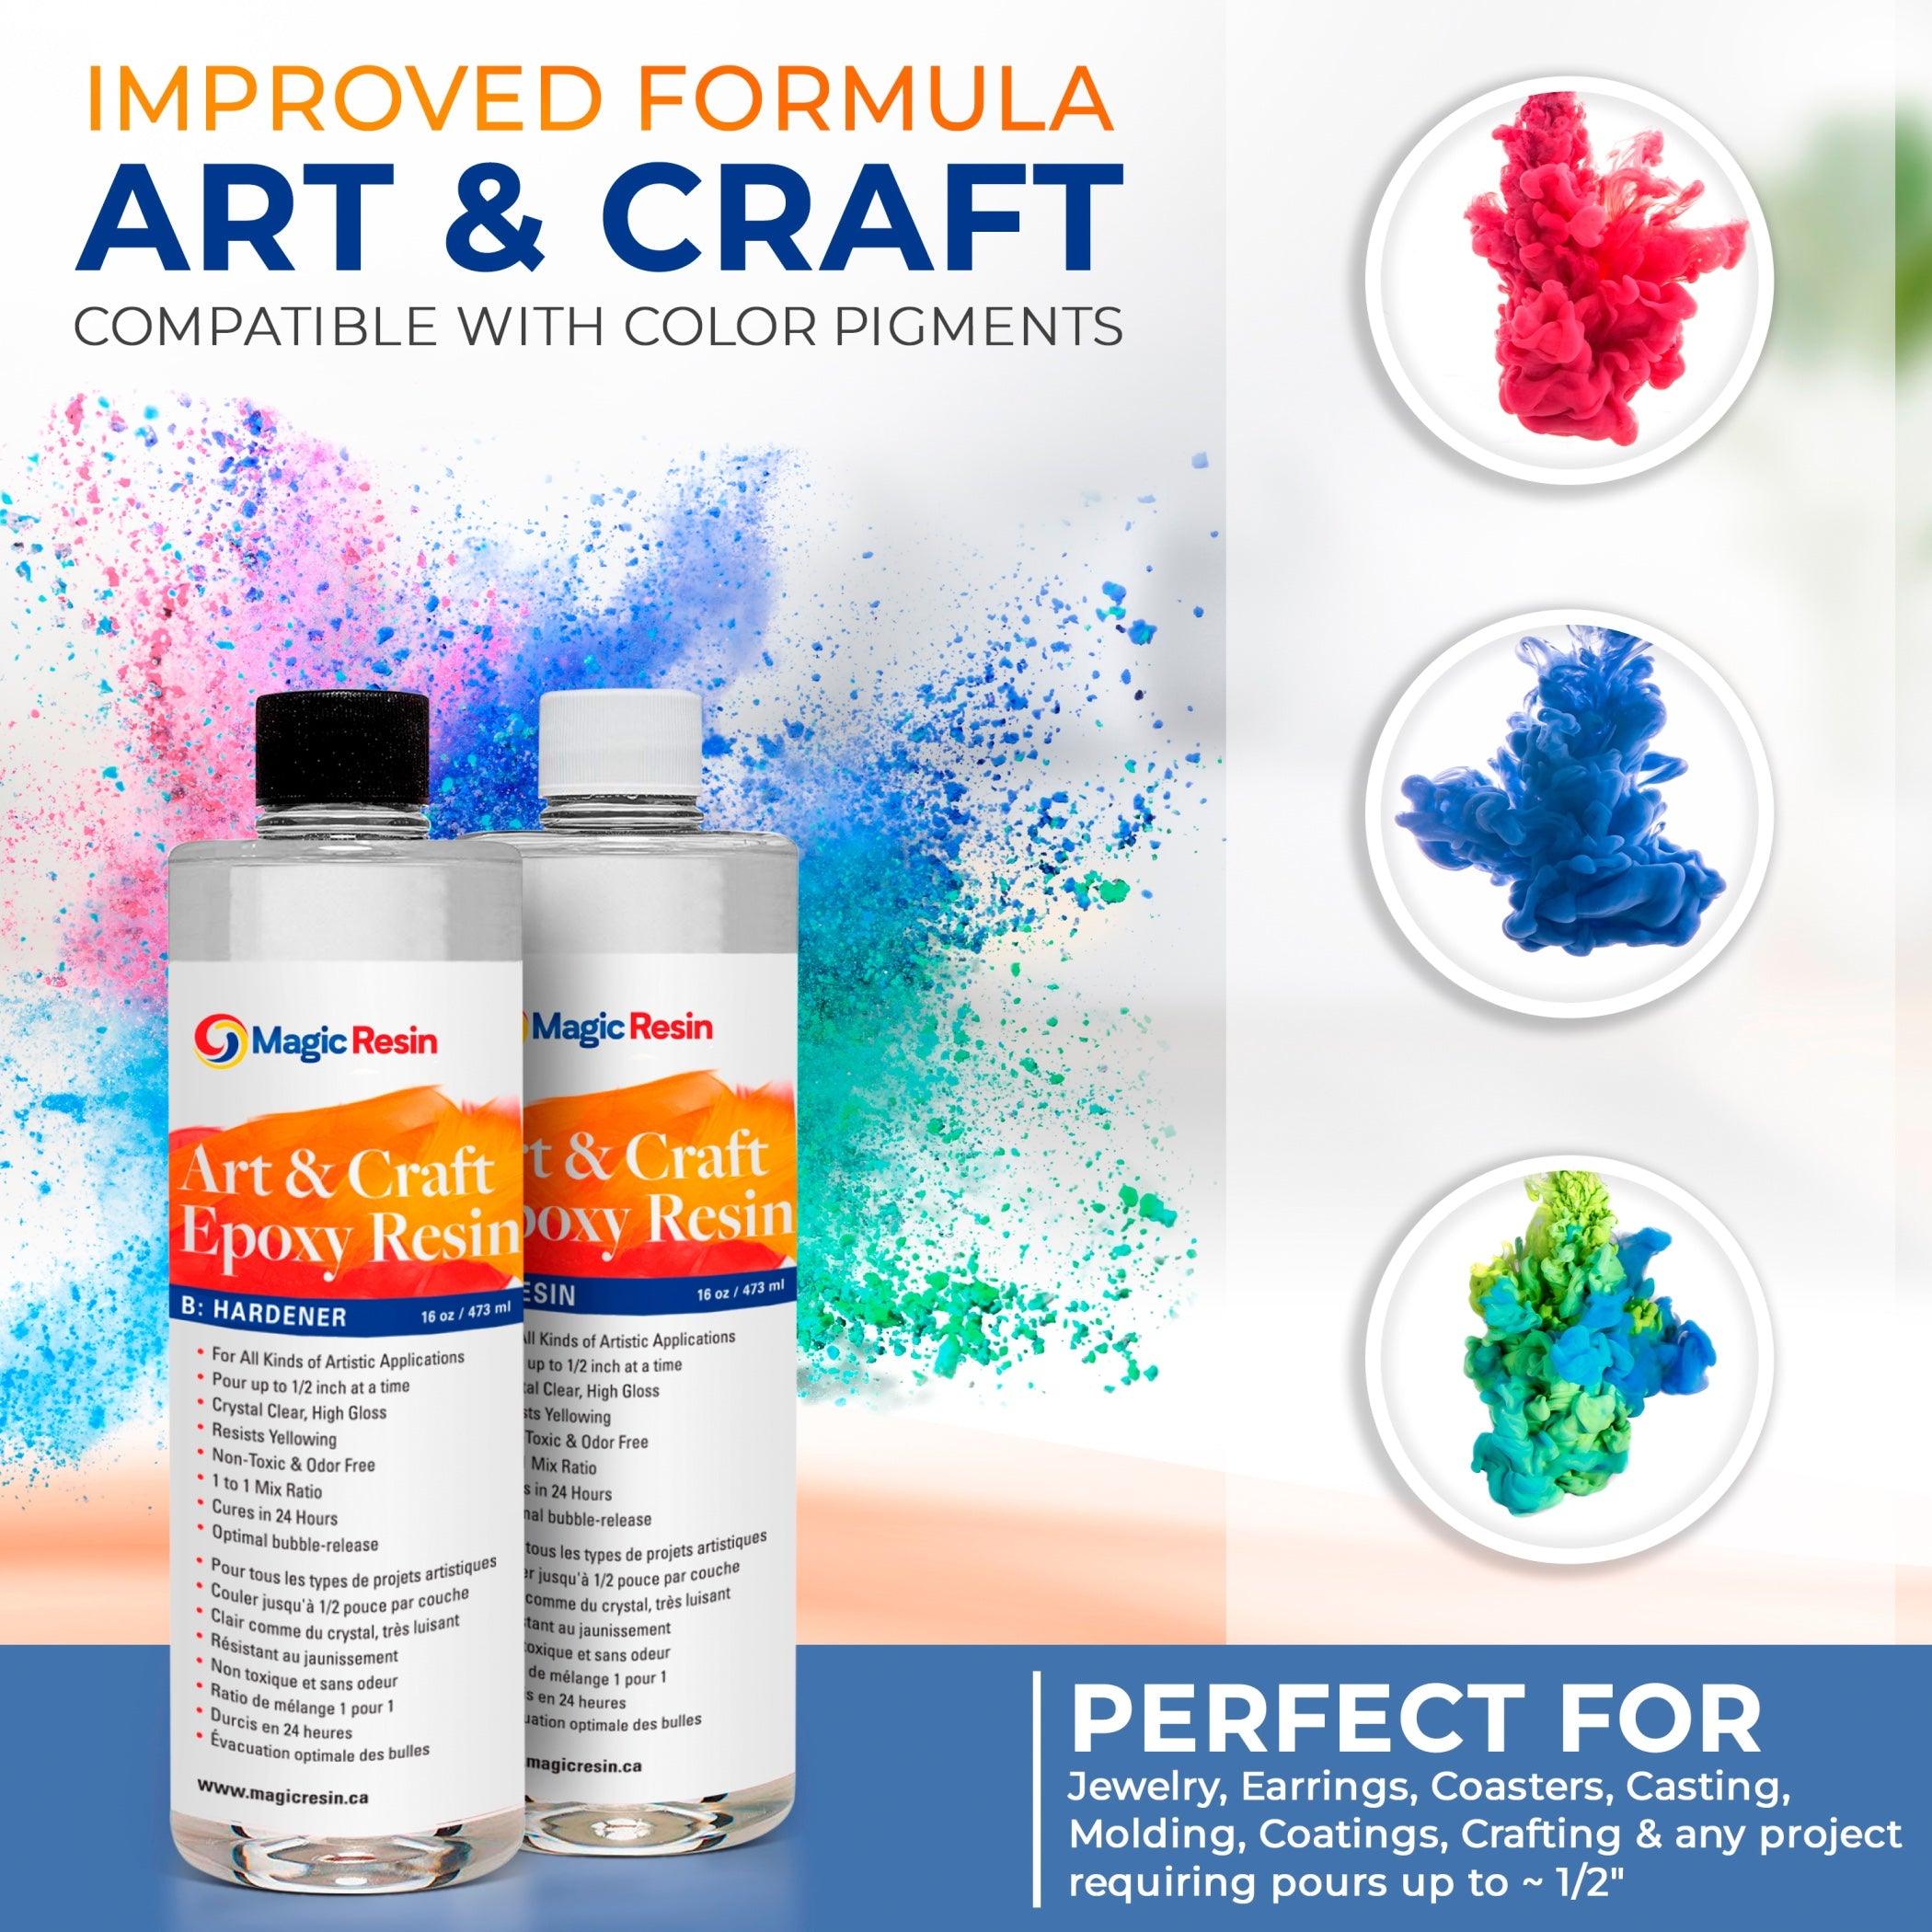 32 Oz (946 ml) | Art & Craft Epoxy Resin Kit | Includes 3 pairs of gloves, 2 cups, 4 sticks & 5 x 5g mica powder bags | Free express shipping - Magic Resin USA